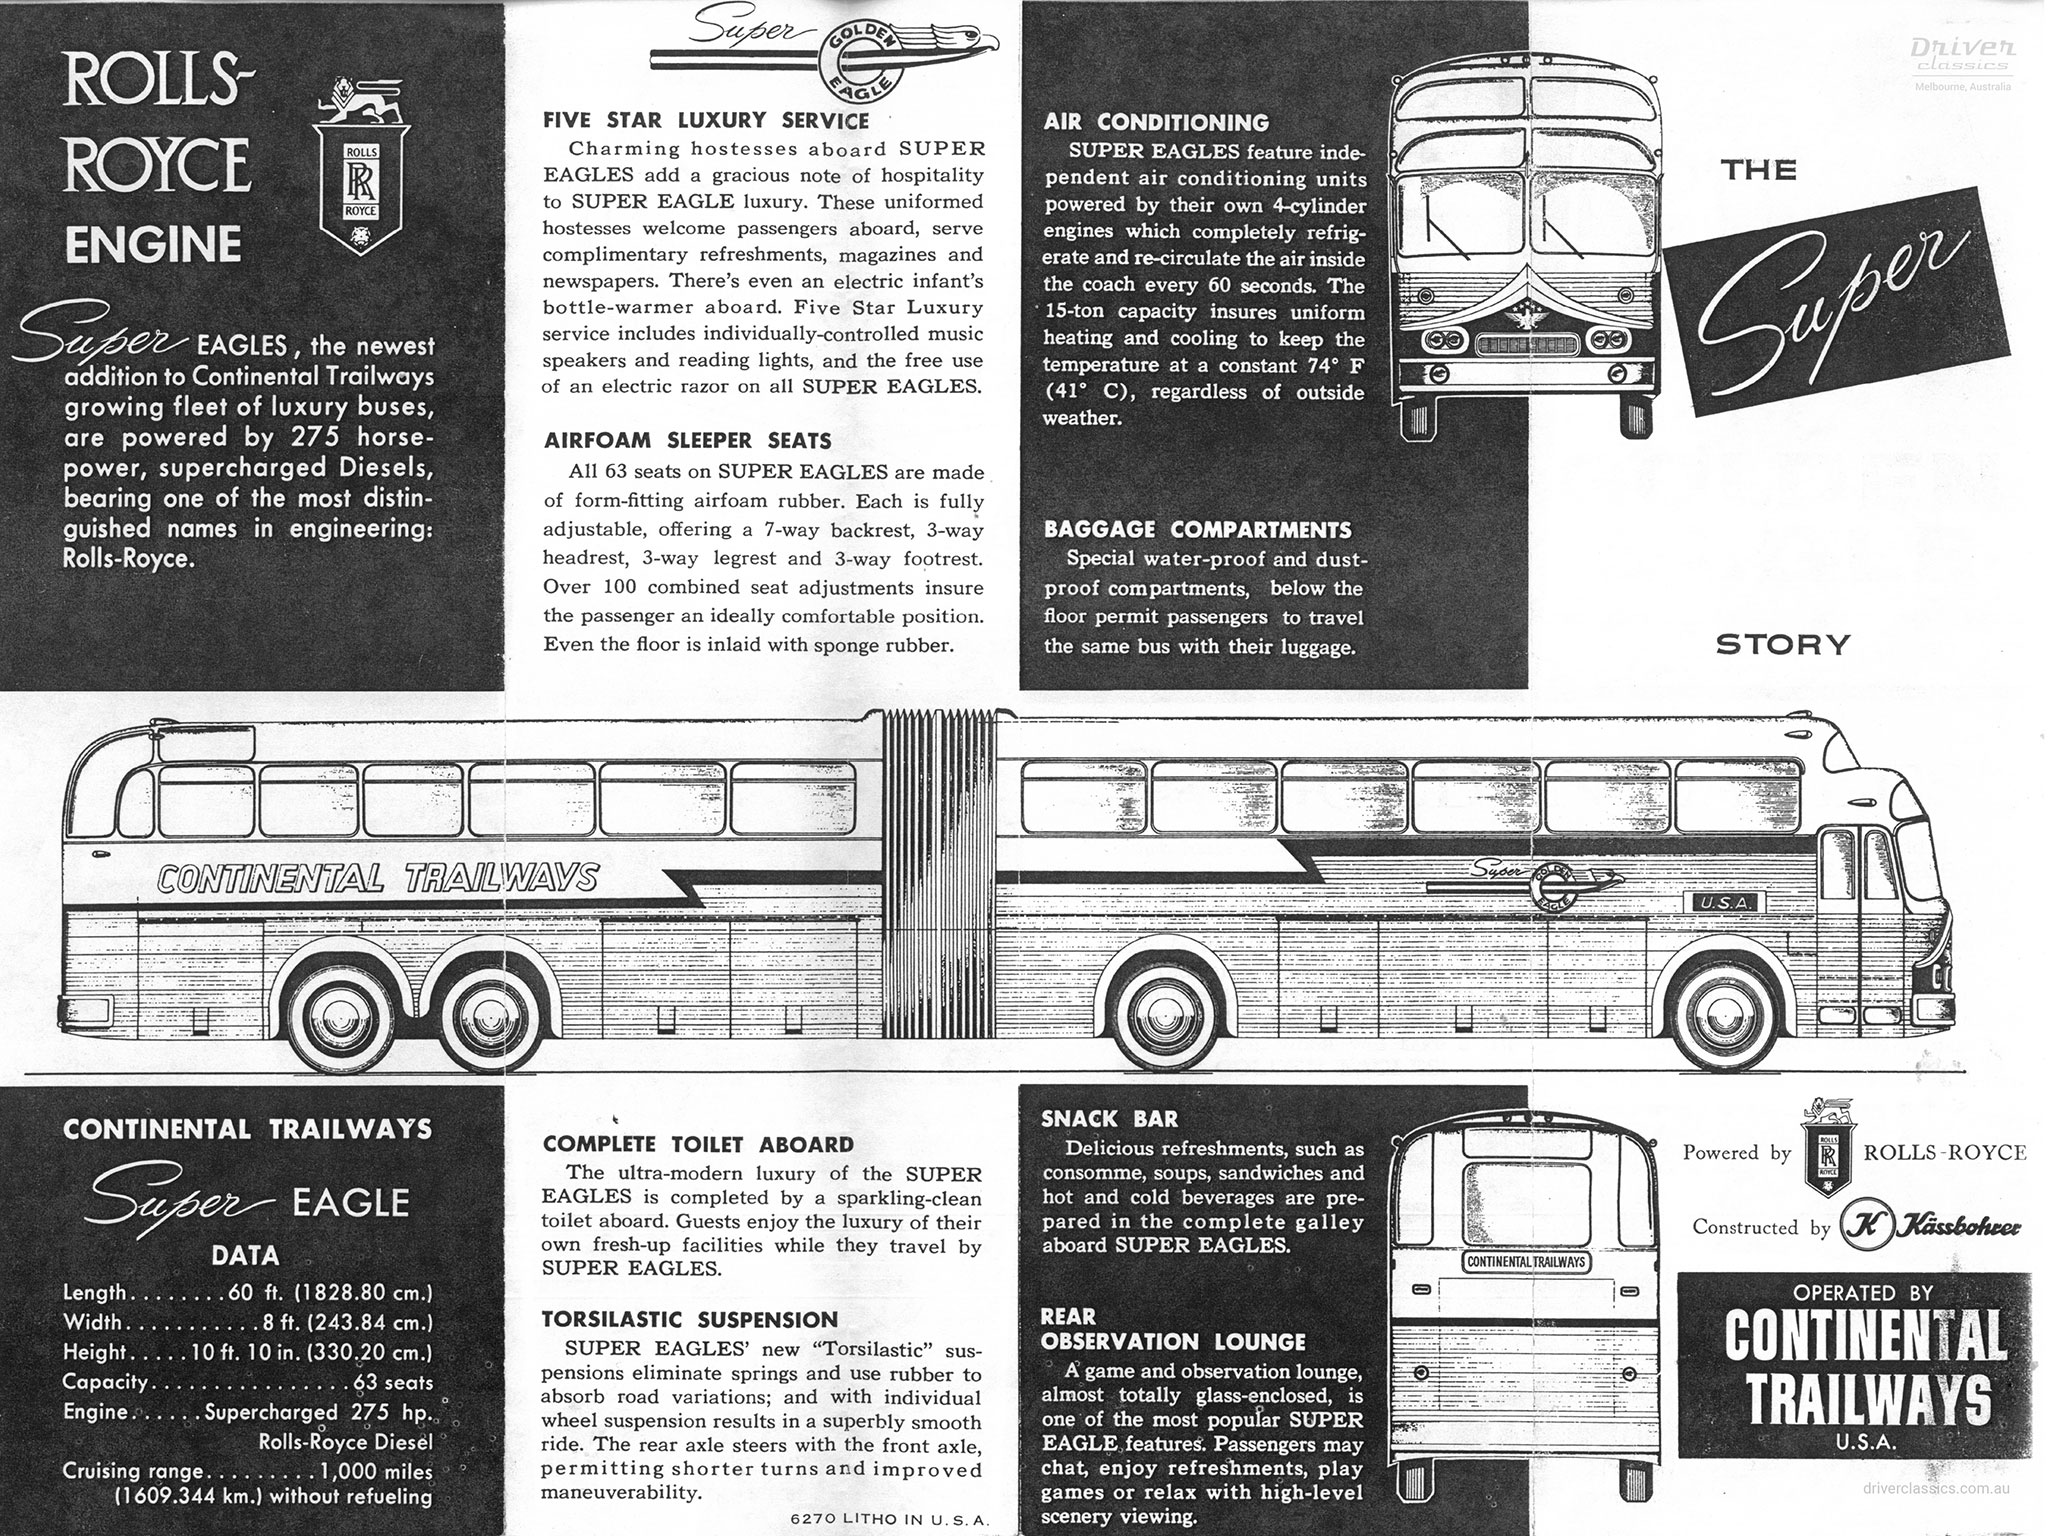 Continental Trailways brochure for the 1959 Super Golden Eagles front